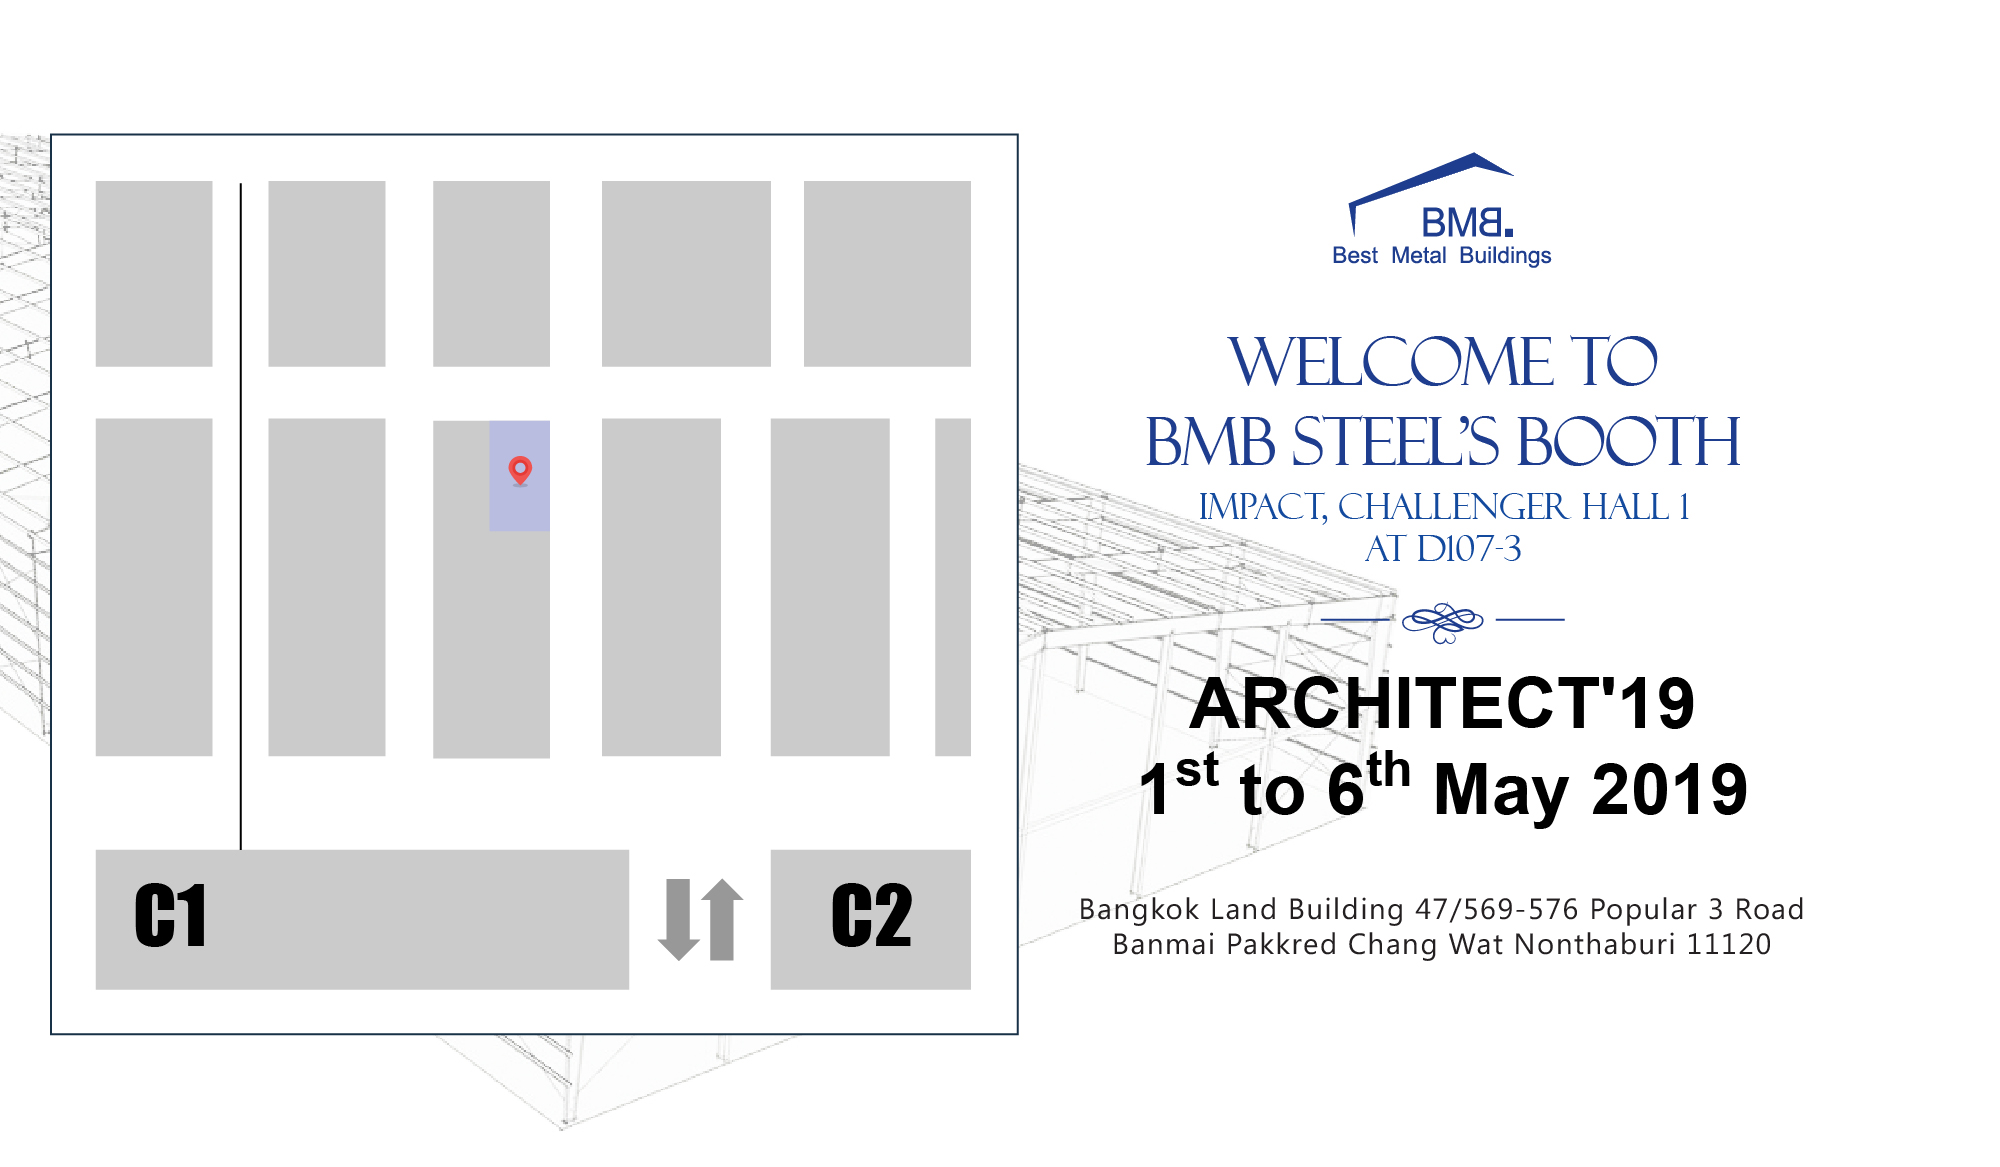 BMB Steel delightedly invites you to visit our booth at Thai Architect 2019.